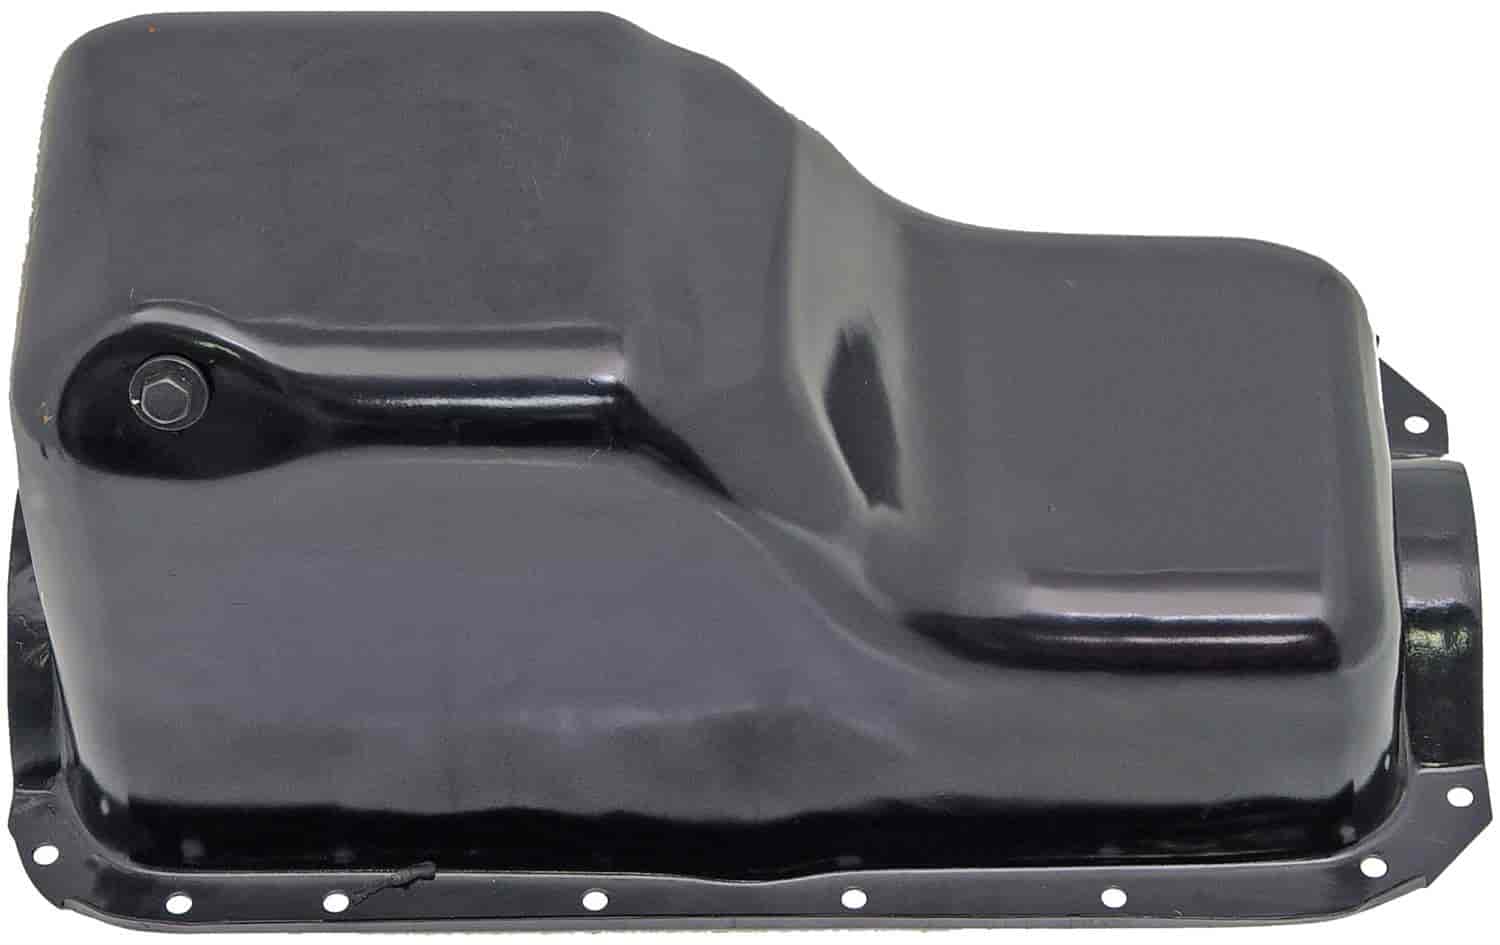 Stock Replacement Oil Pan 1990-1992 Aerostar 3.0L (from 3/27/90)